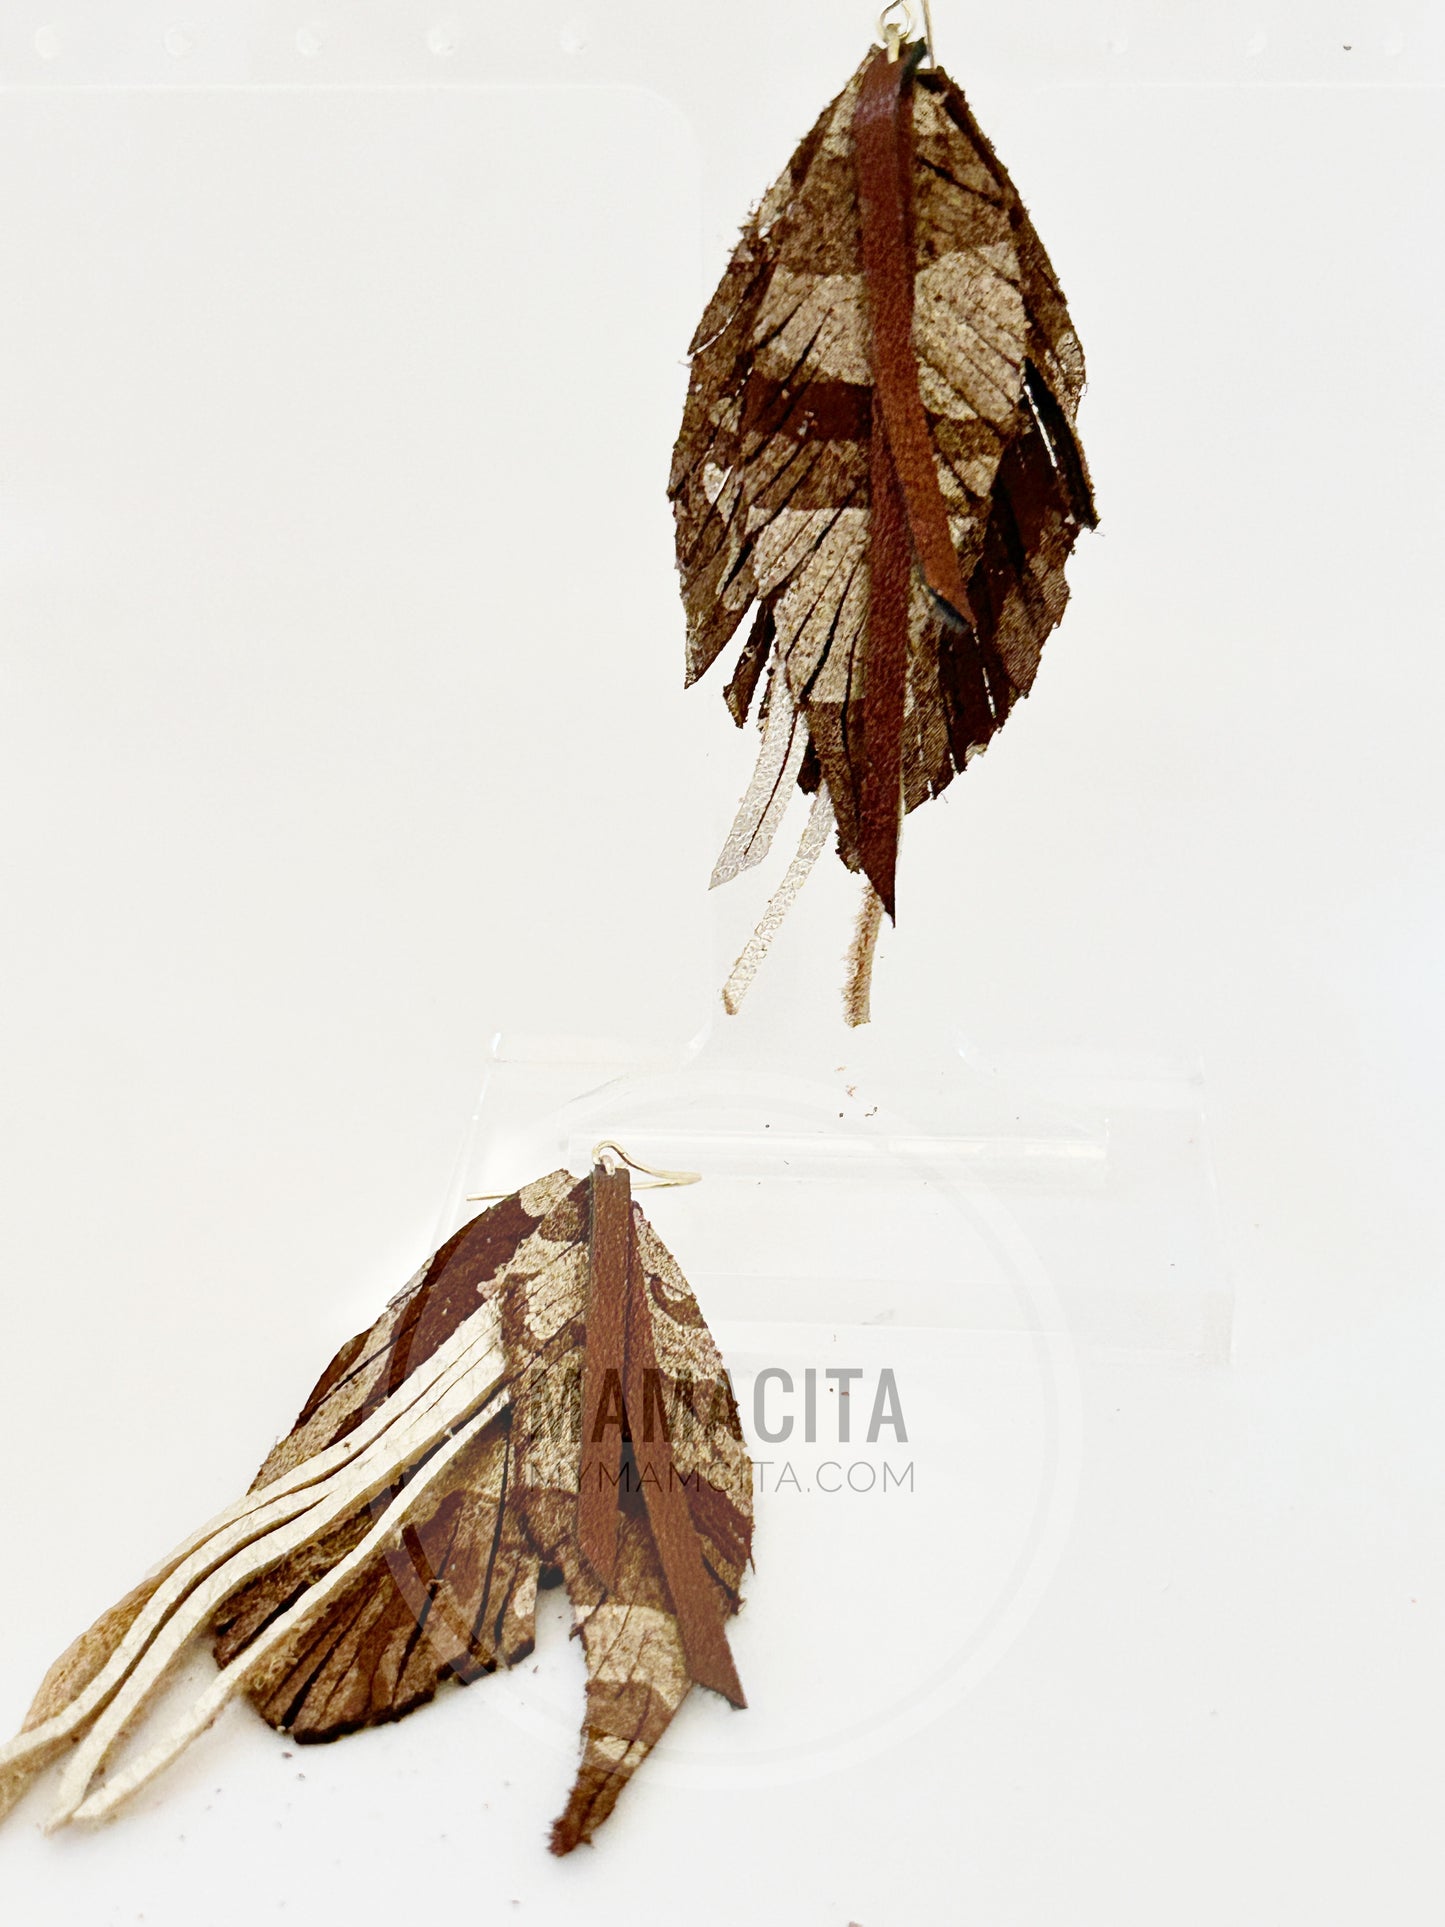 Brown Camo Fringe Layered Leather Earring